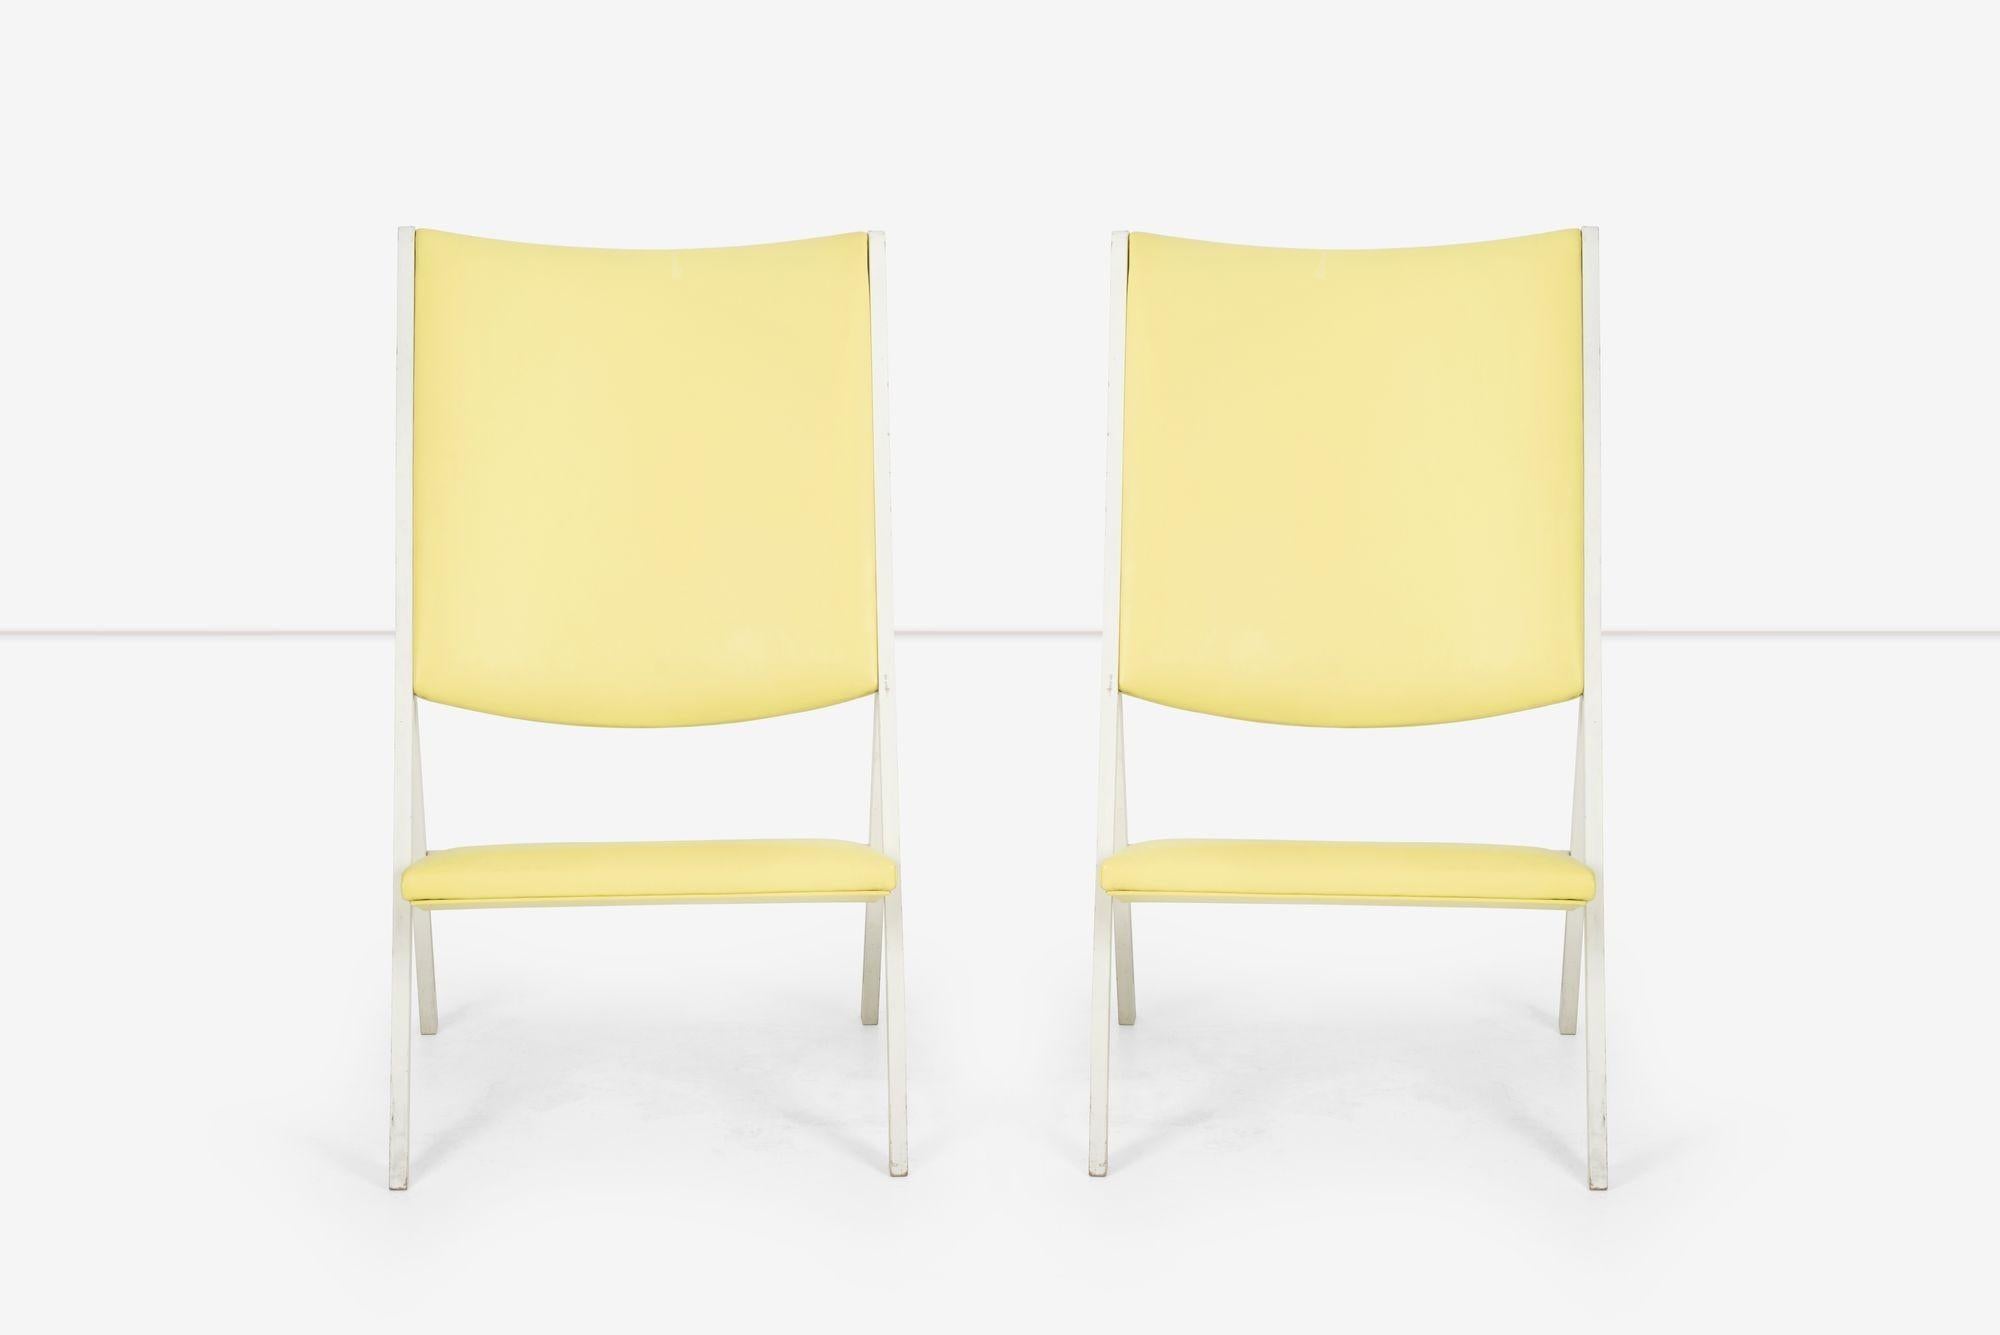 Pair of Gio Ponti Gabriela Lounge chairs, Italy 1970; Original White lacquered wood frames with reupholstered yellow Spinneybeck leather seat and back.
[Pictured Image 12; Decal manufacturer's label to underside ‘Ponti design per Walter Ponti S.